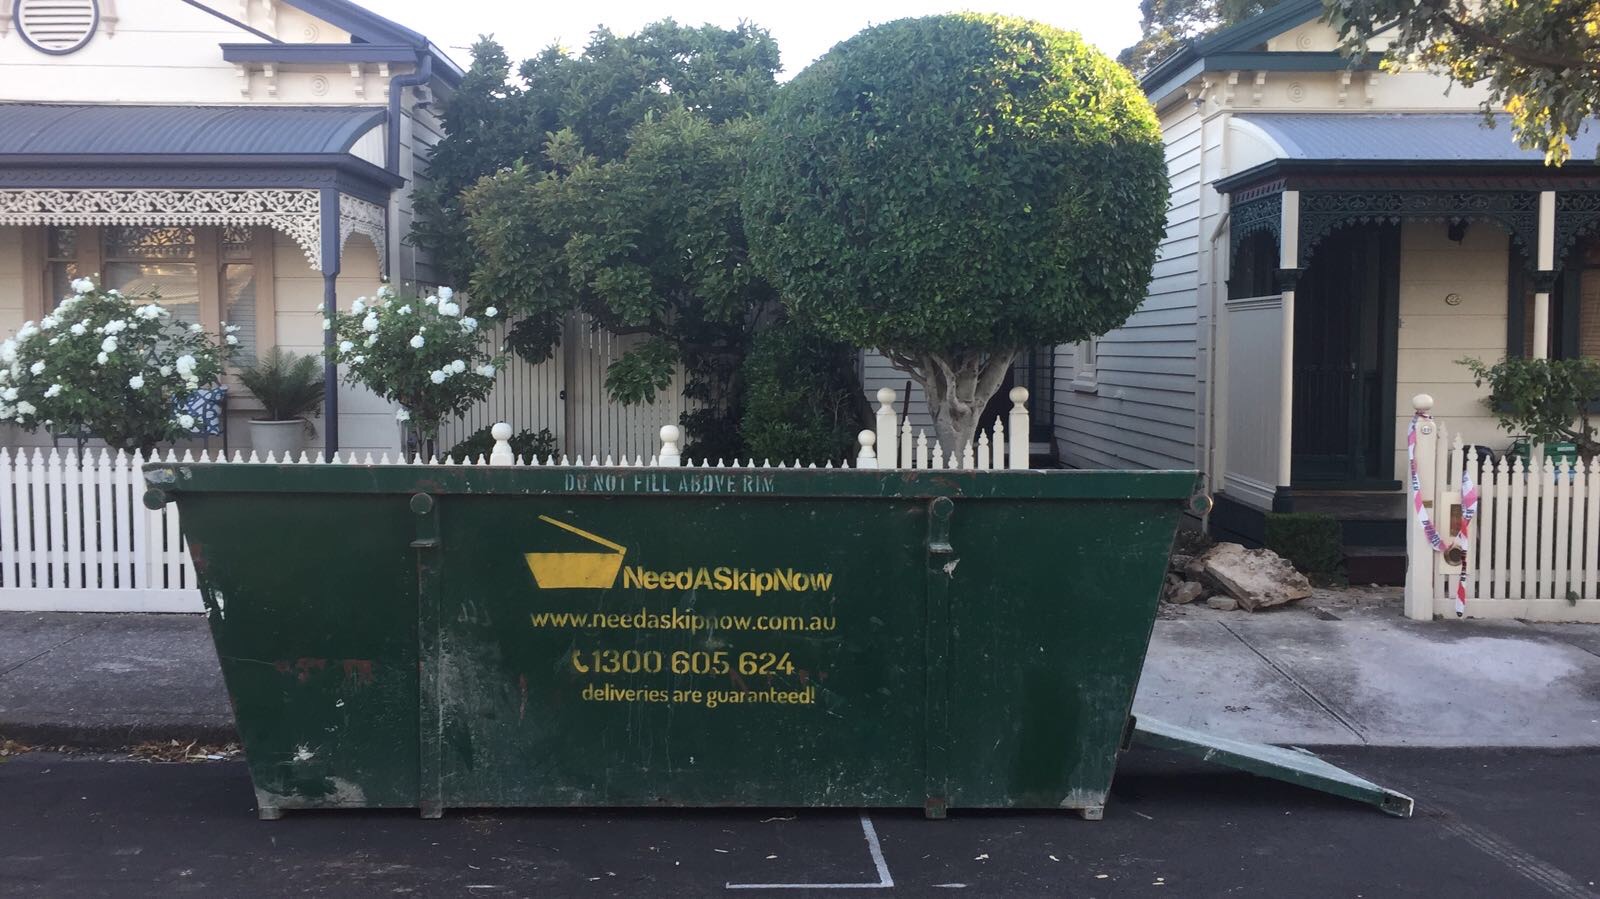 [VIC] Save $40 on Any Skip Bin Hire in Melbourne this Spring with Promo Code